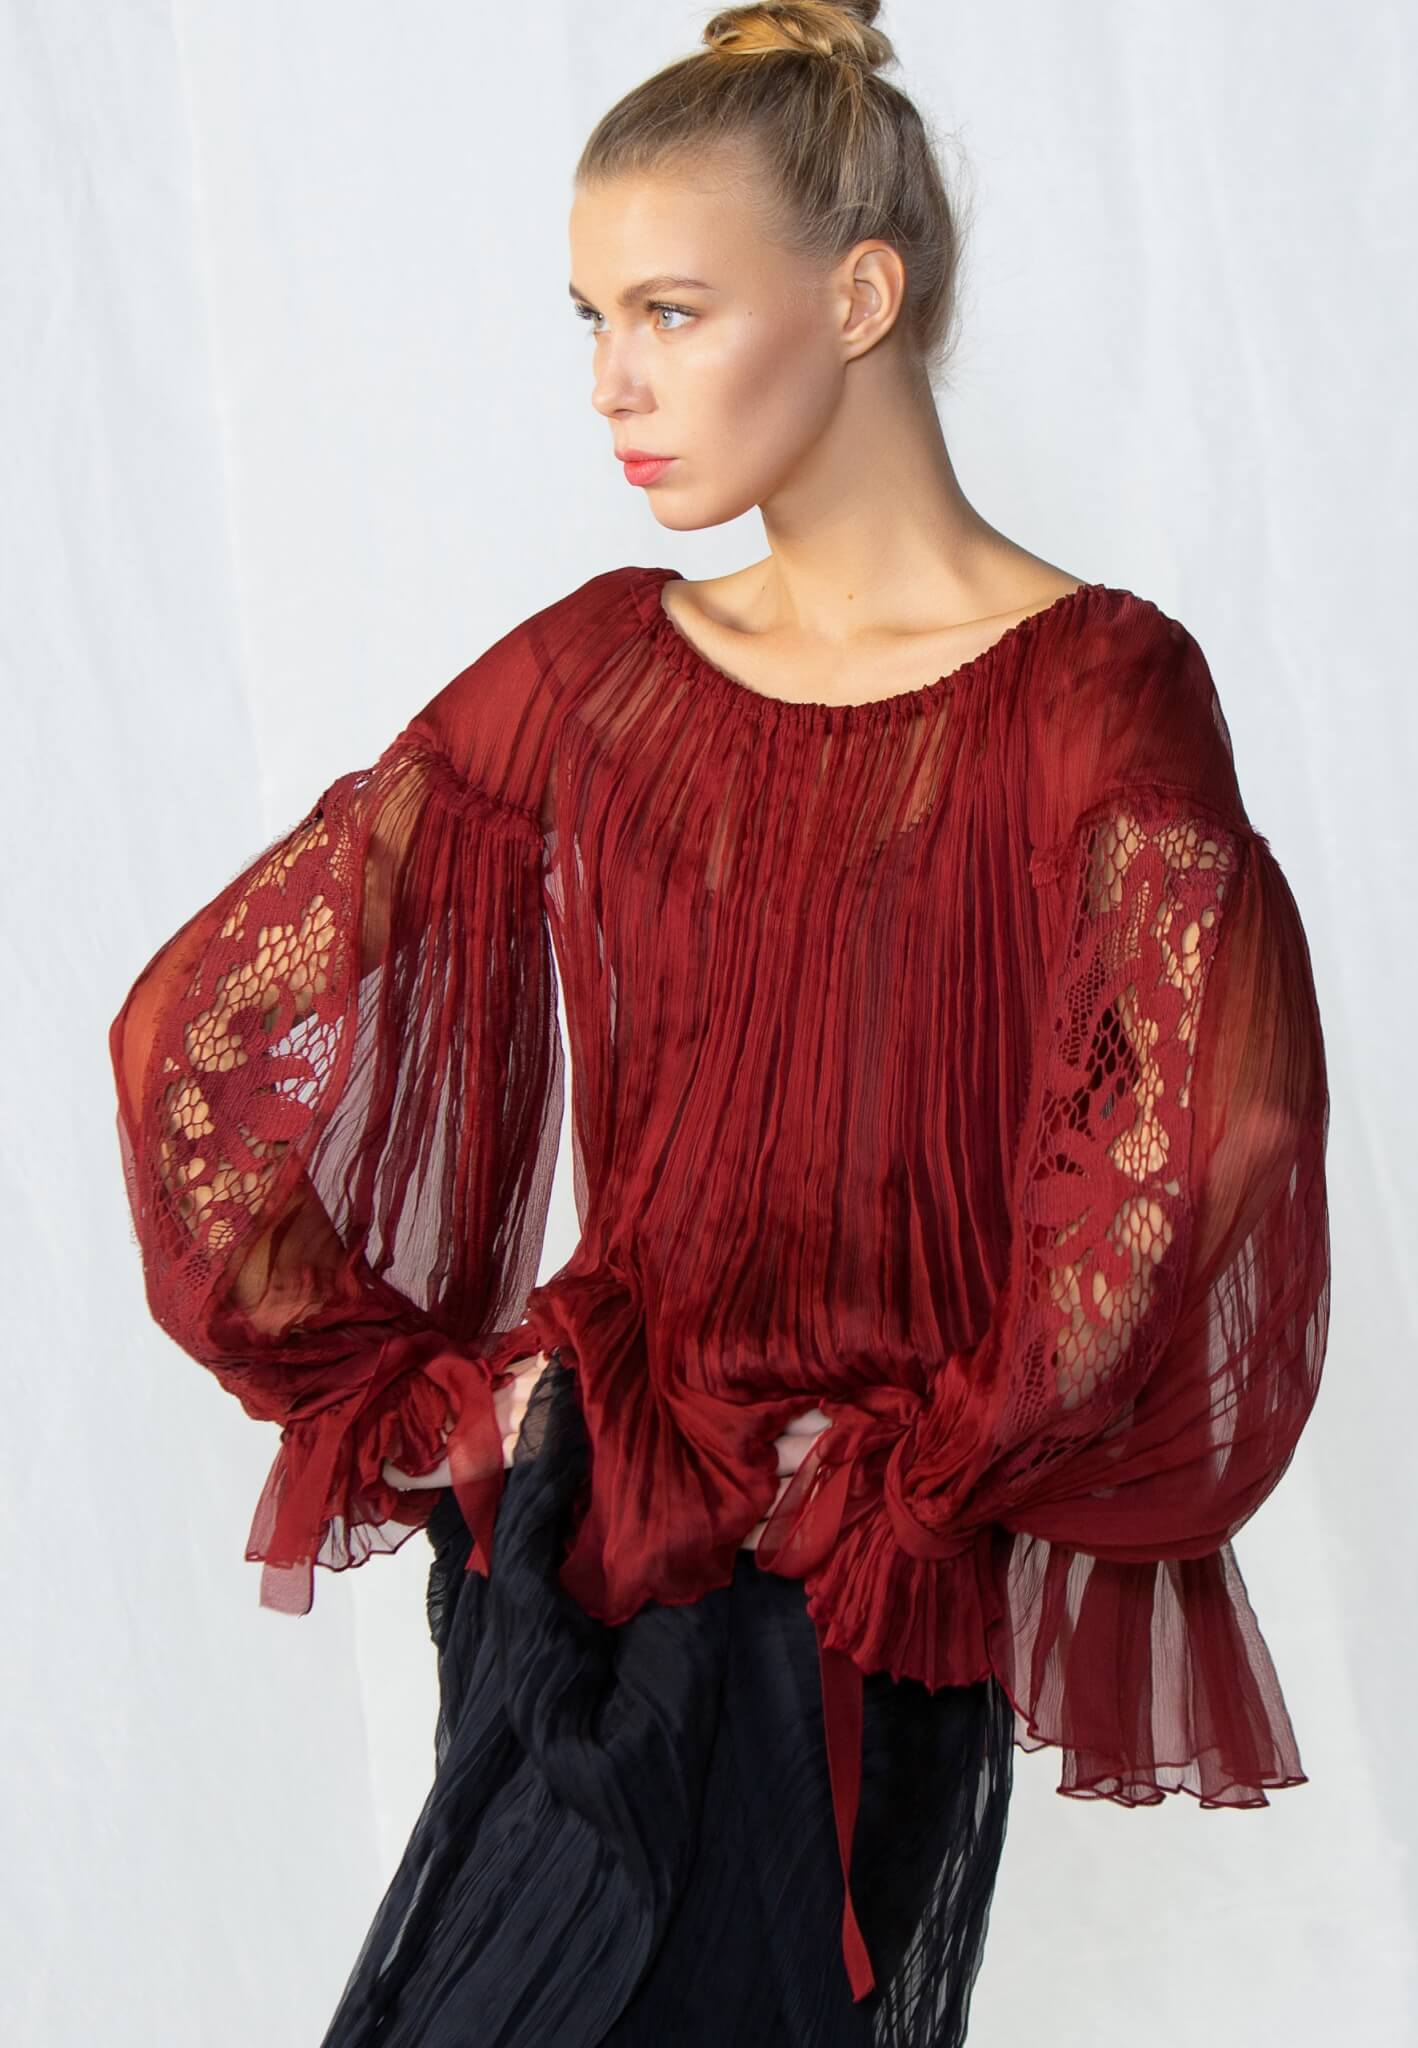 Red silk blouse with lace